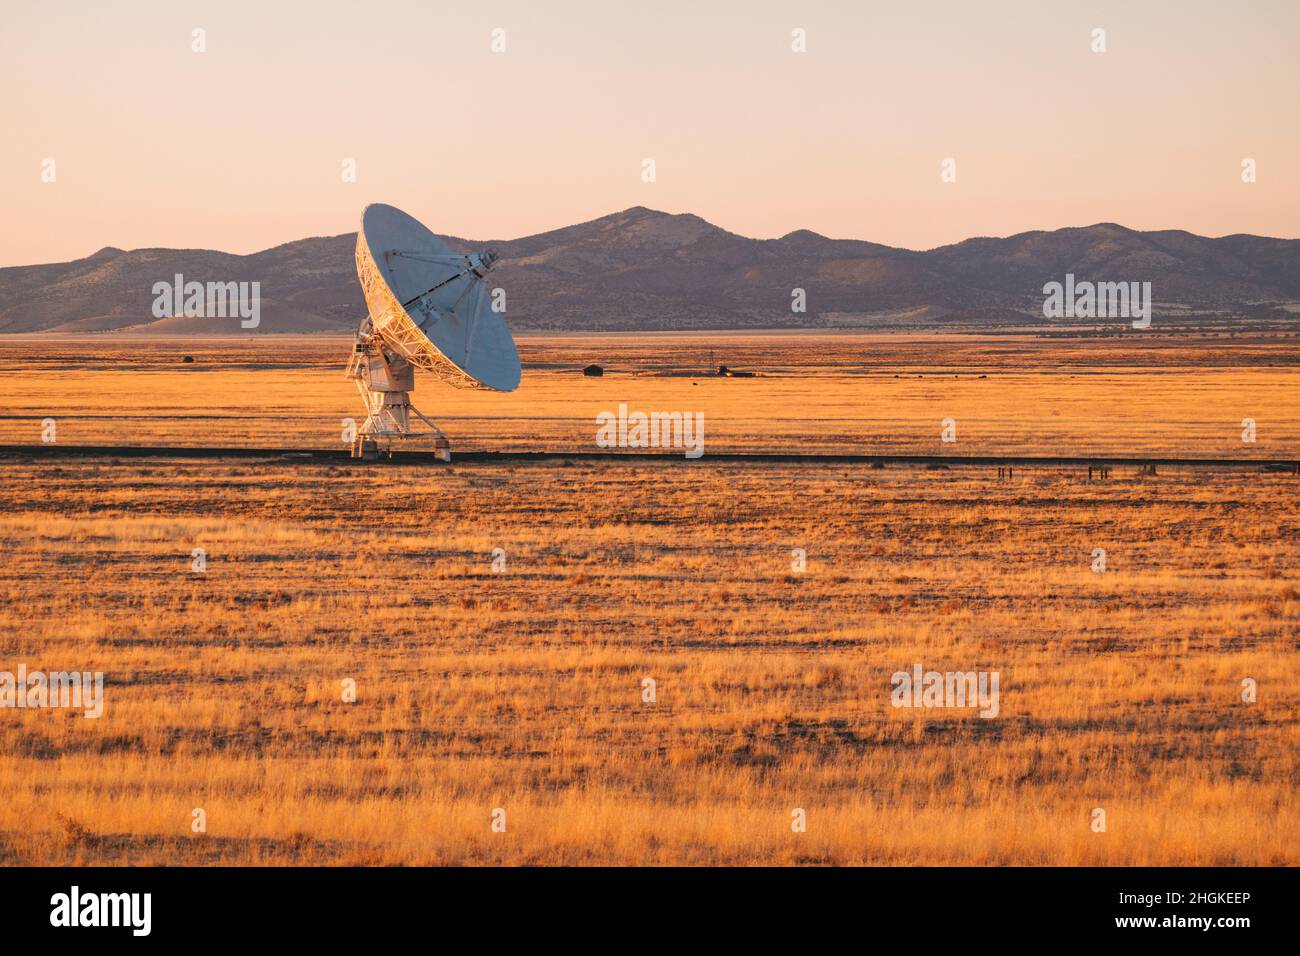 A lone radio telescope at the Karl G. Jansky Very Large Array on the Plains of San Agustin, New Mexico Stock Photo